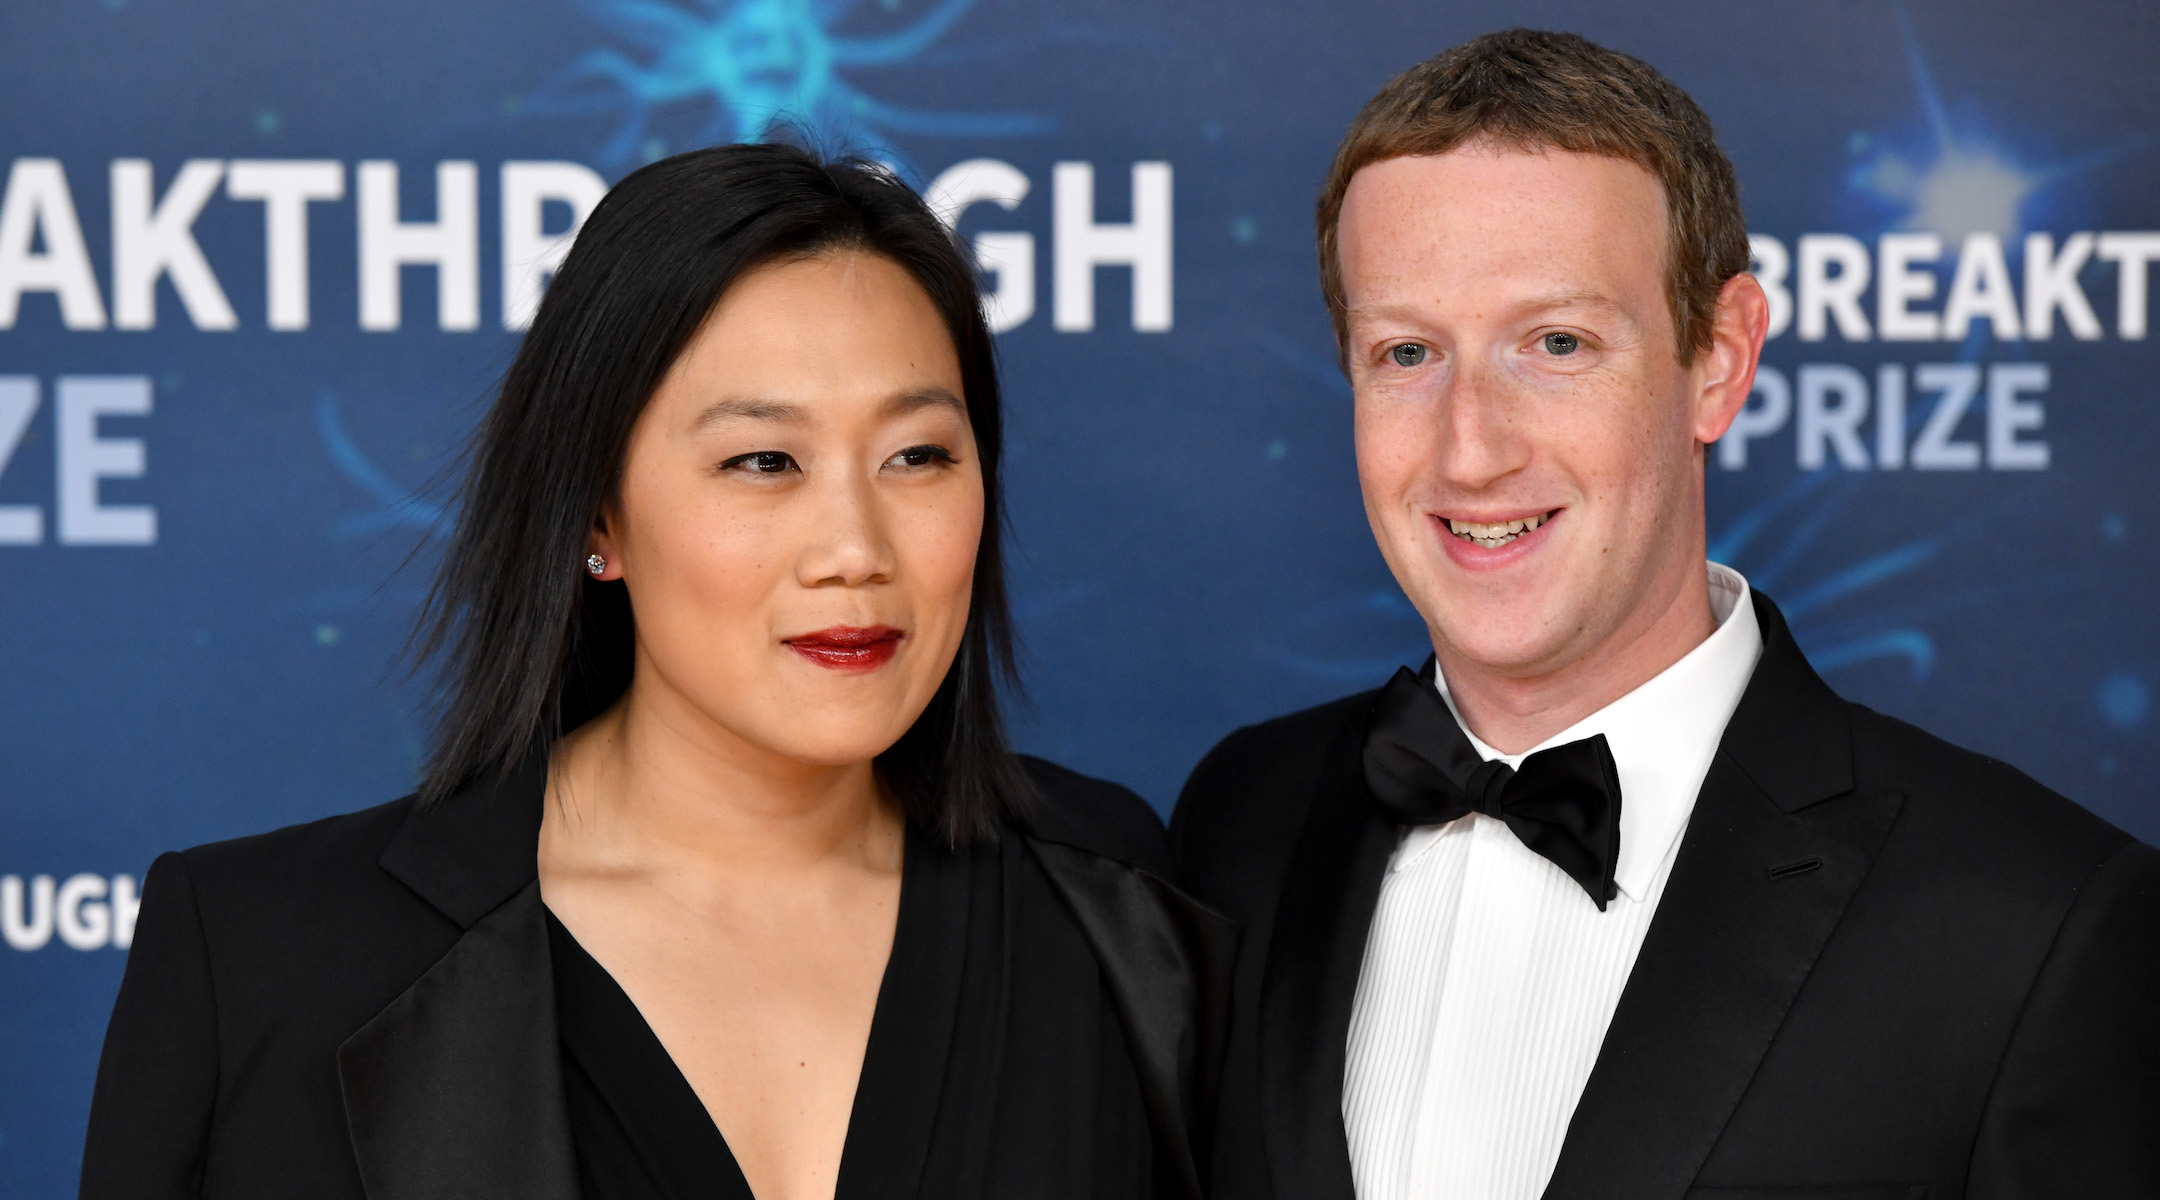 Priscilla Chan and Mark Zuckerberg attend the 2020 Breakthrough Prize Red Carpet at NASA Ames Research Center in Mountain View, California on Nov. 3, 2019. (Ian Tuttle/Getty Images for Breakthrough Prize )